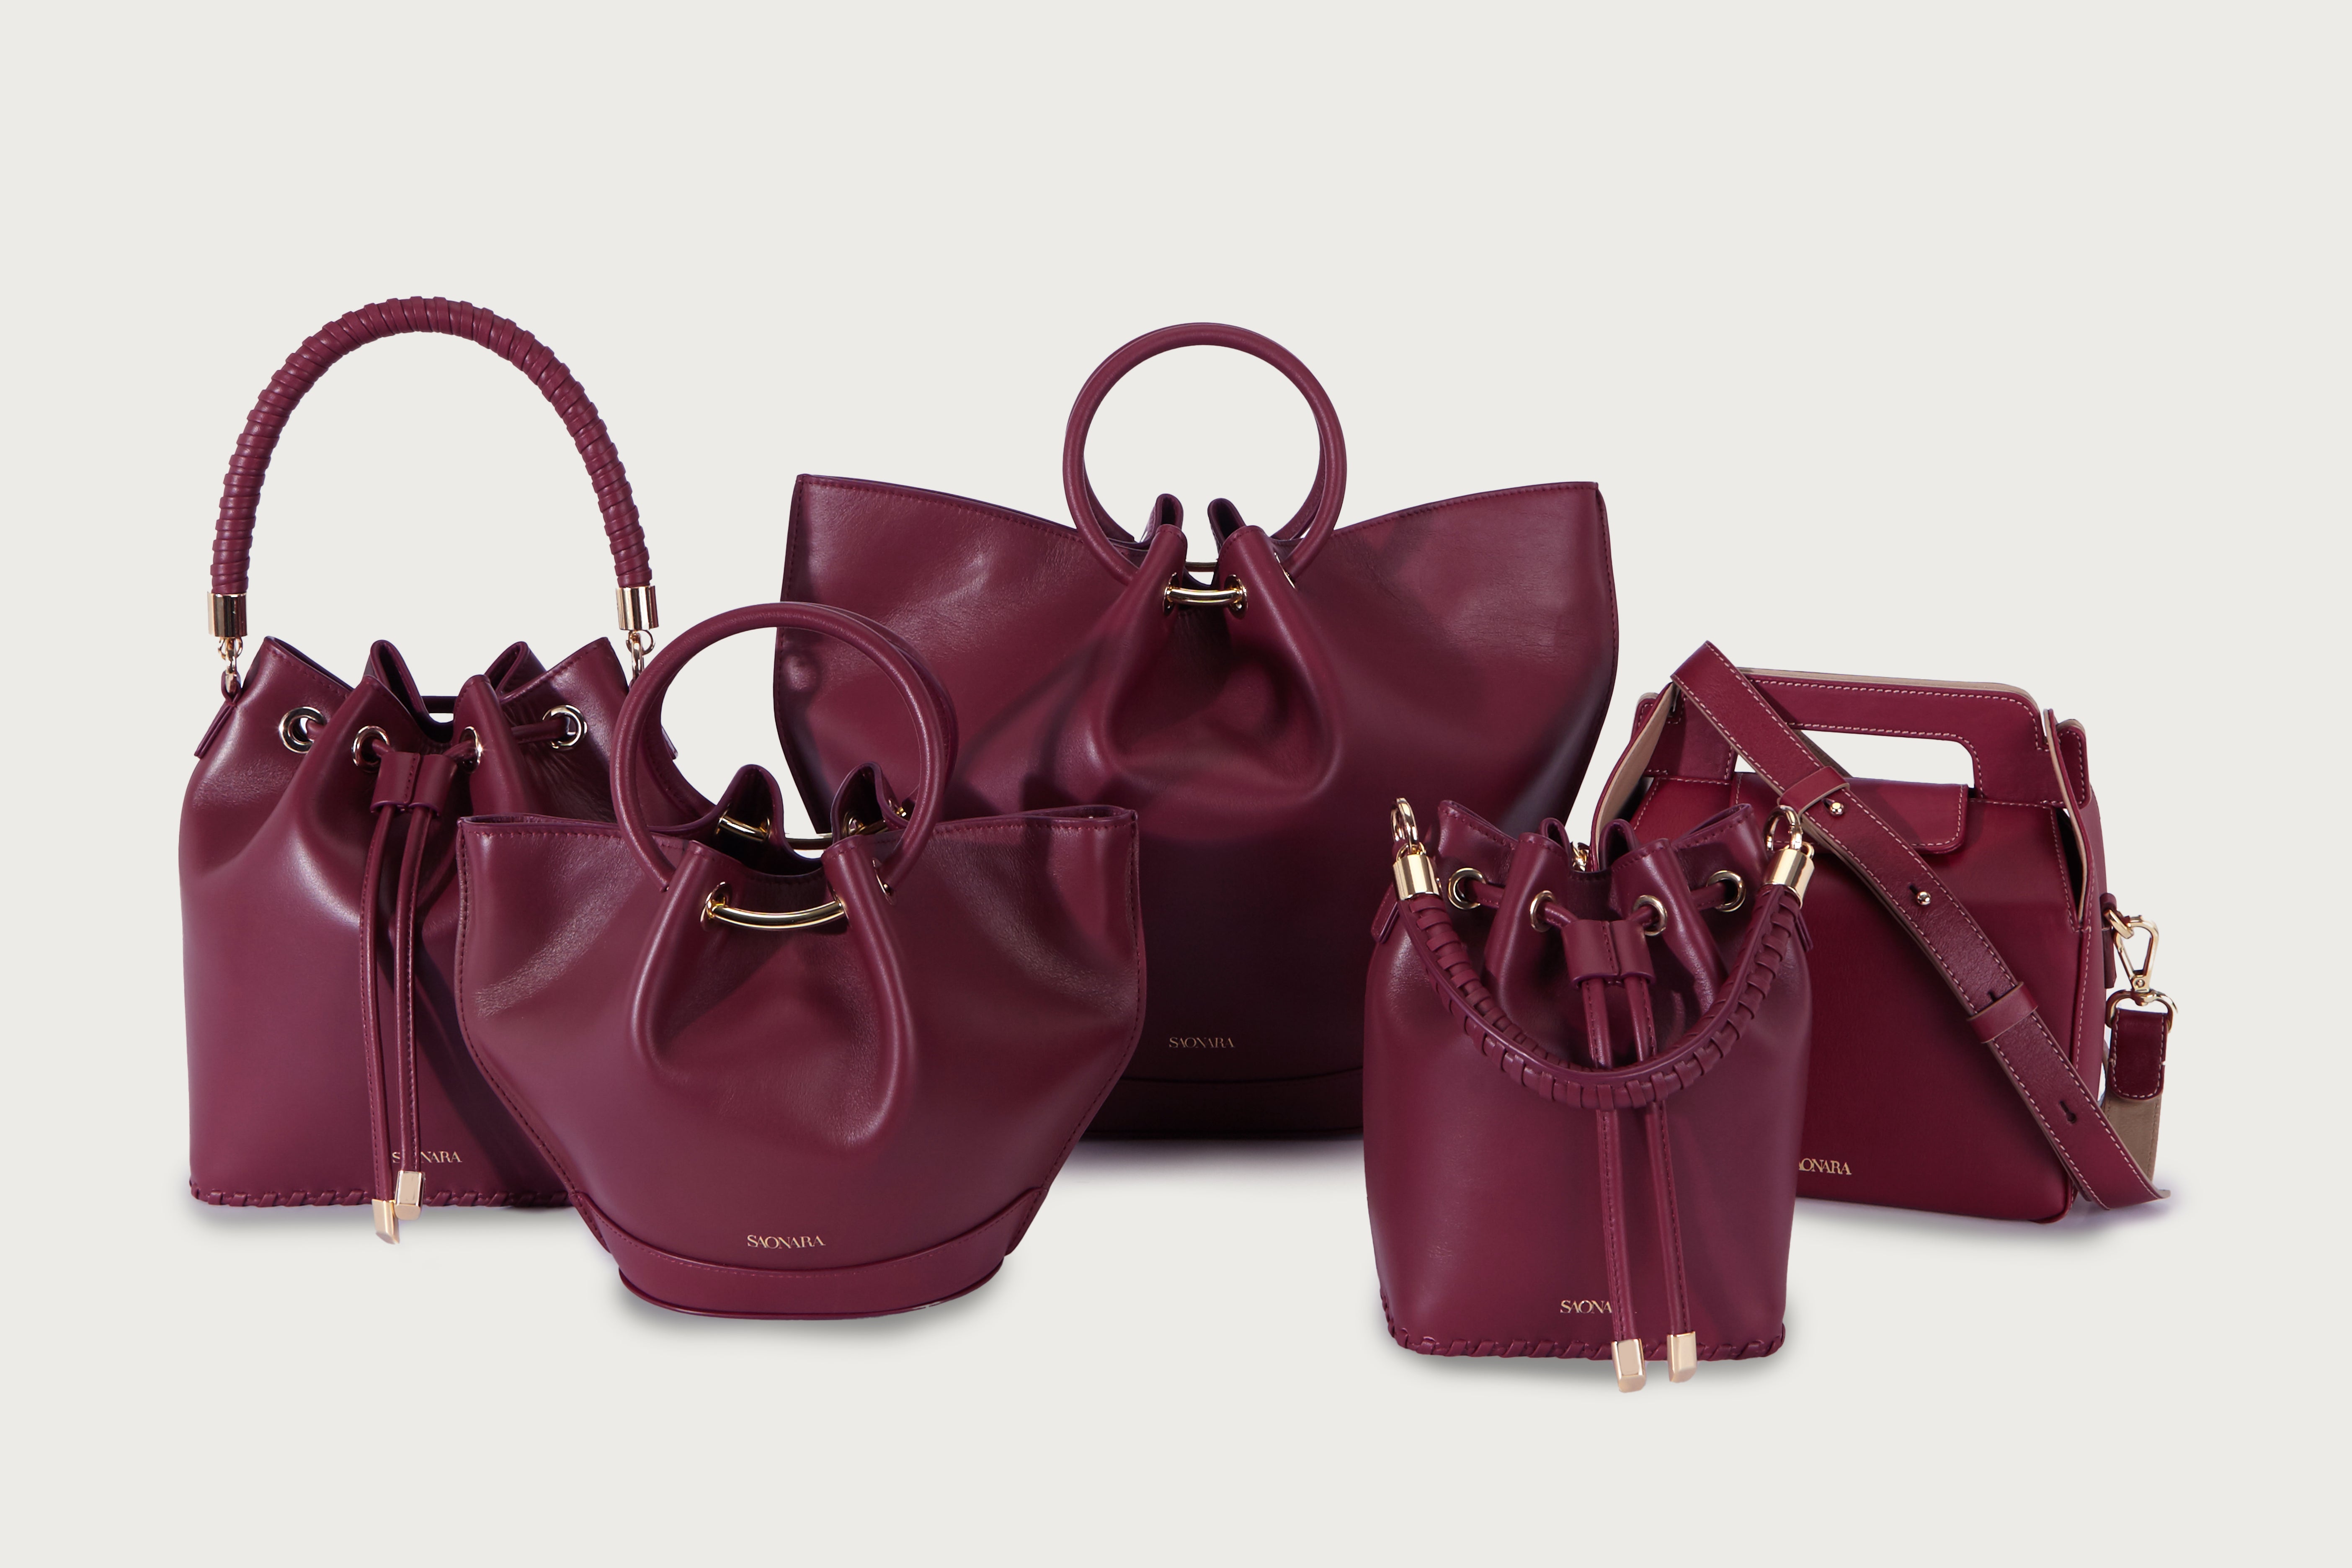 CAPAZO BERRY LEATHER